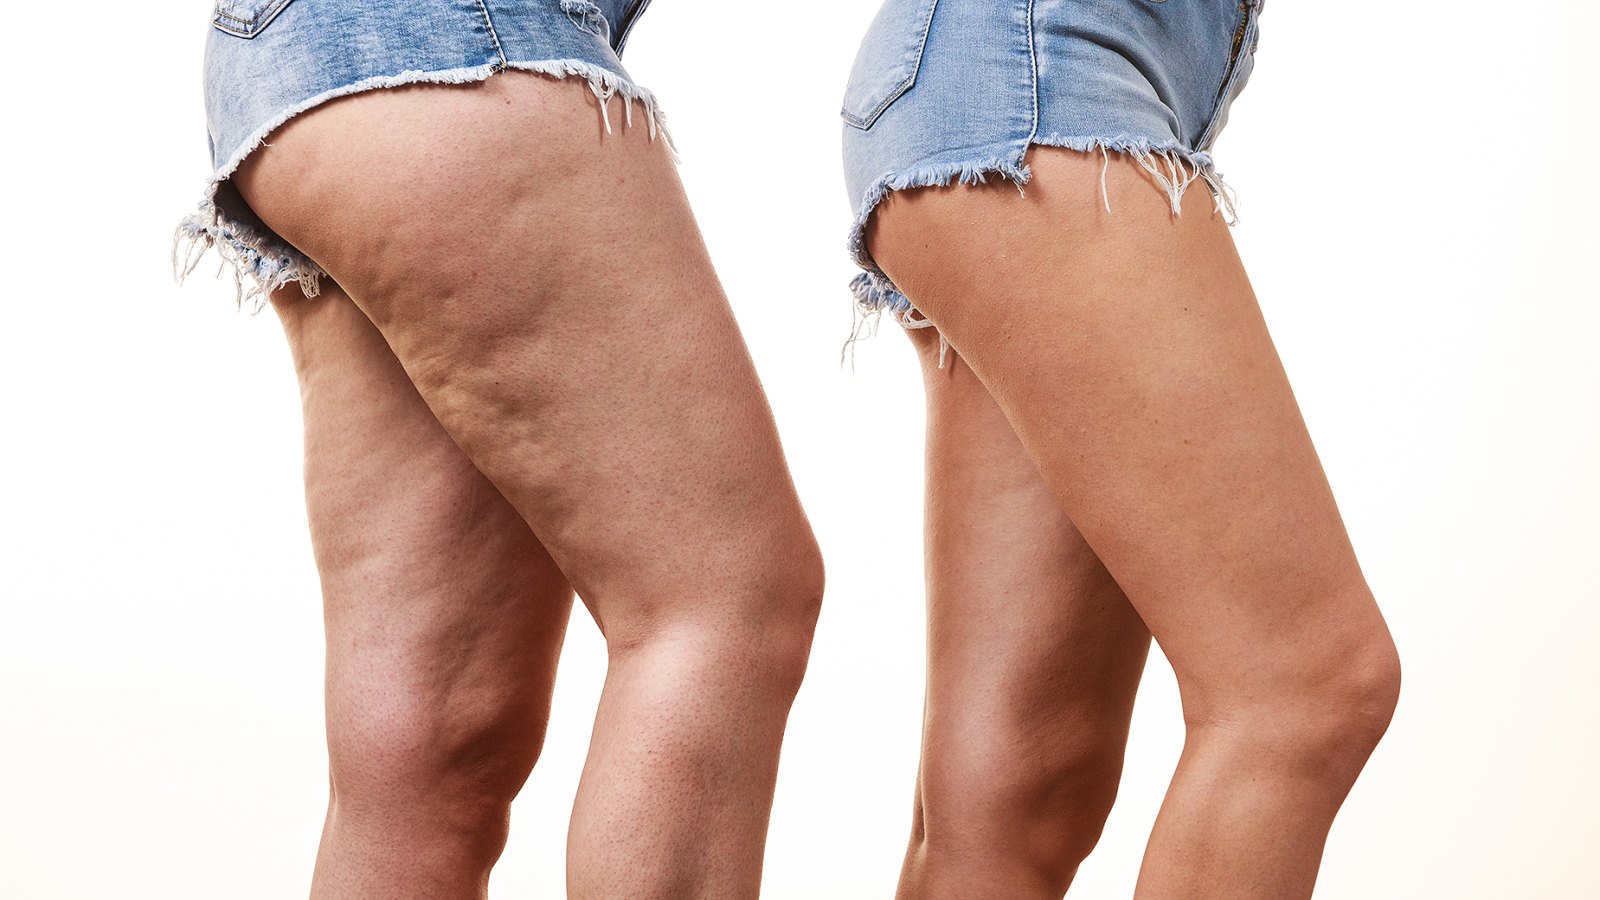 cellulite-before-after